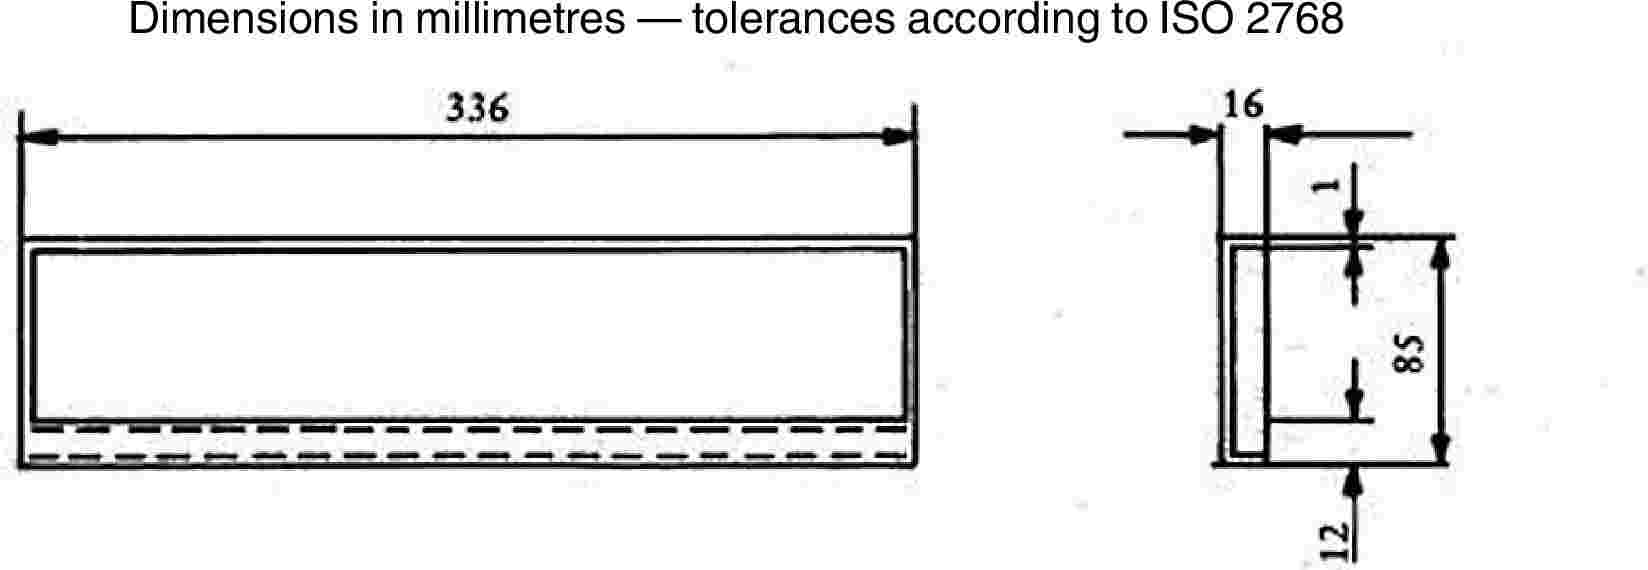 Dimensions in millimetres — tolerances according to ISO 2768